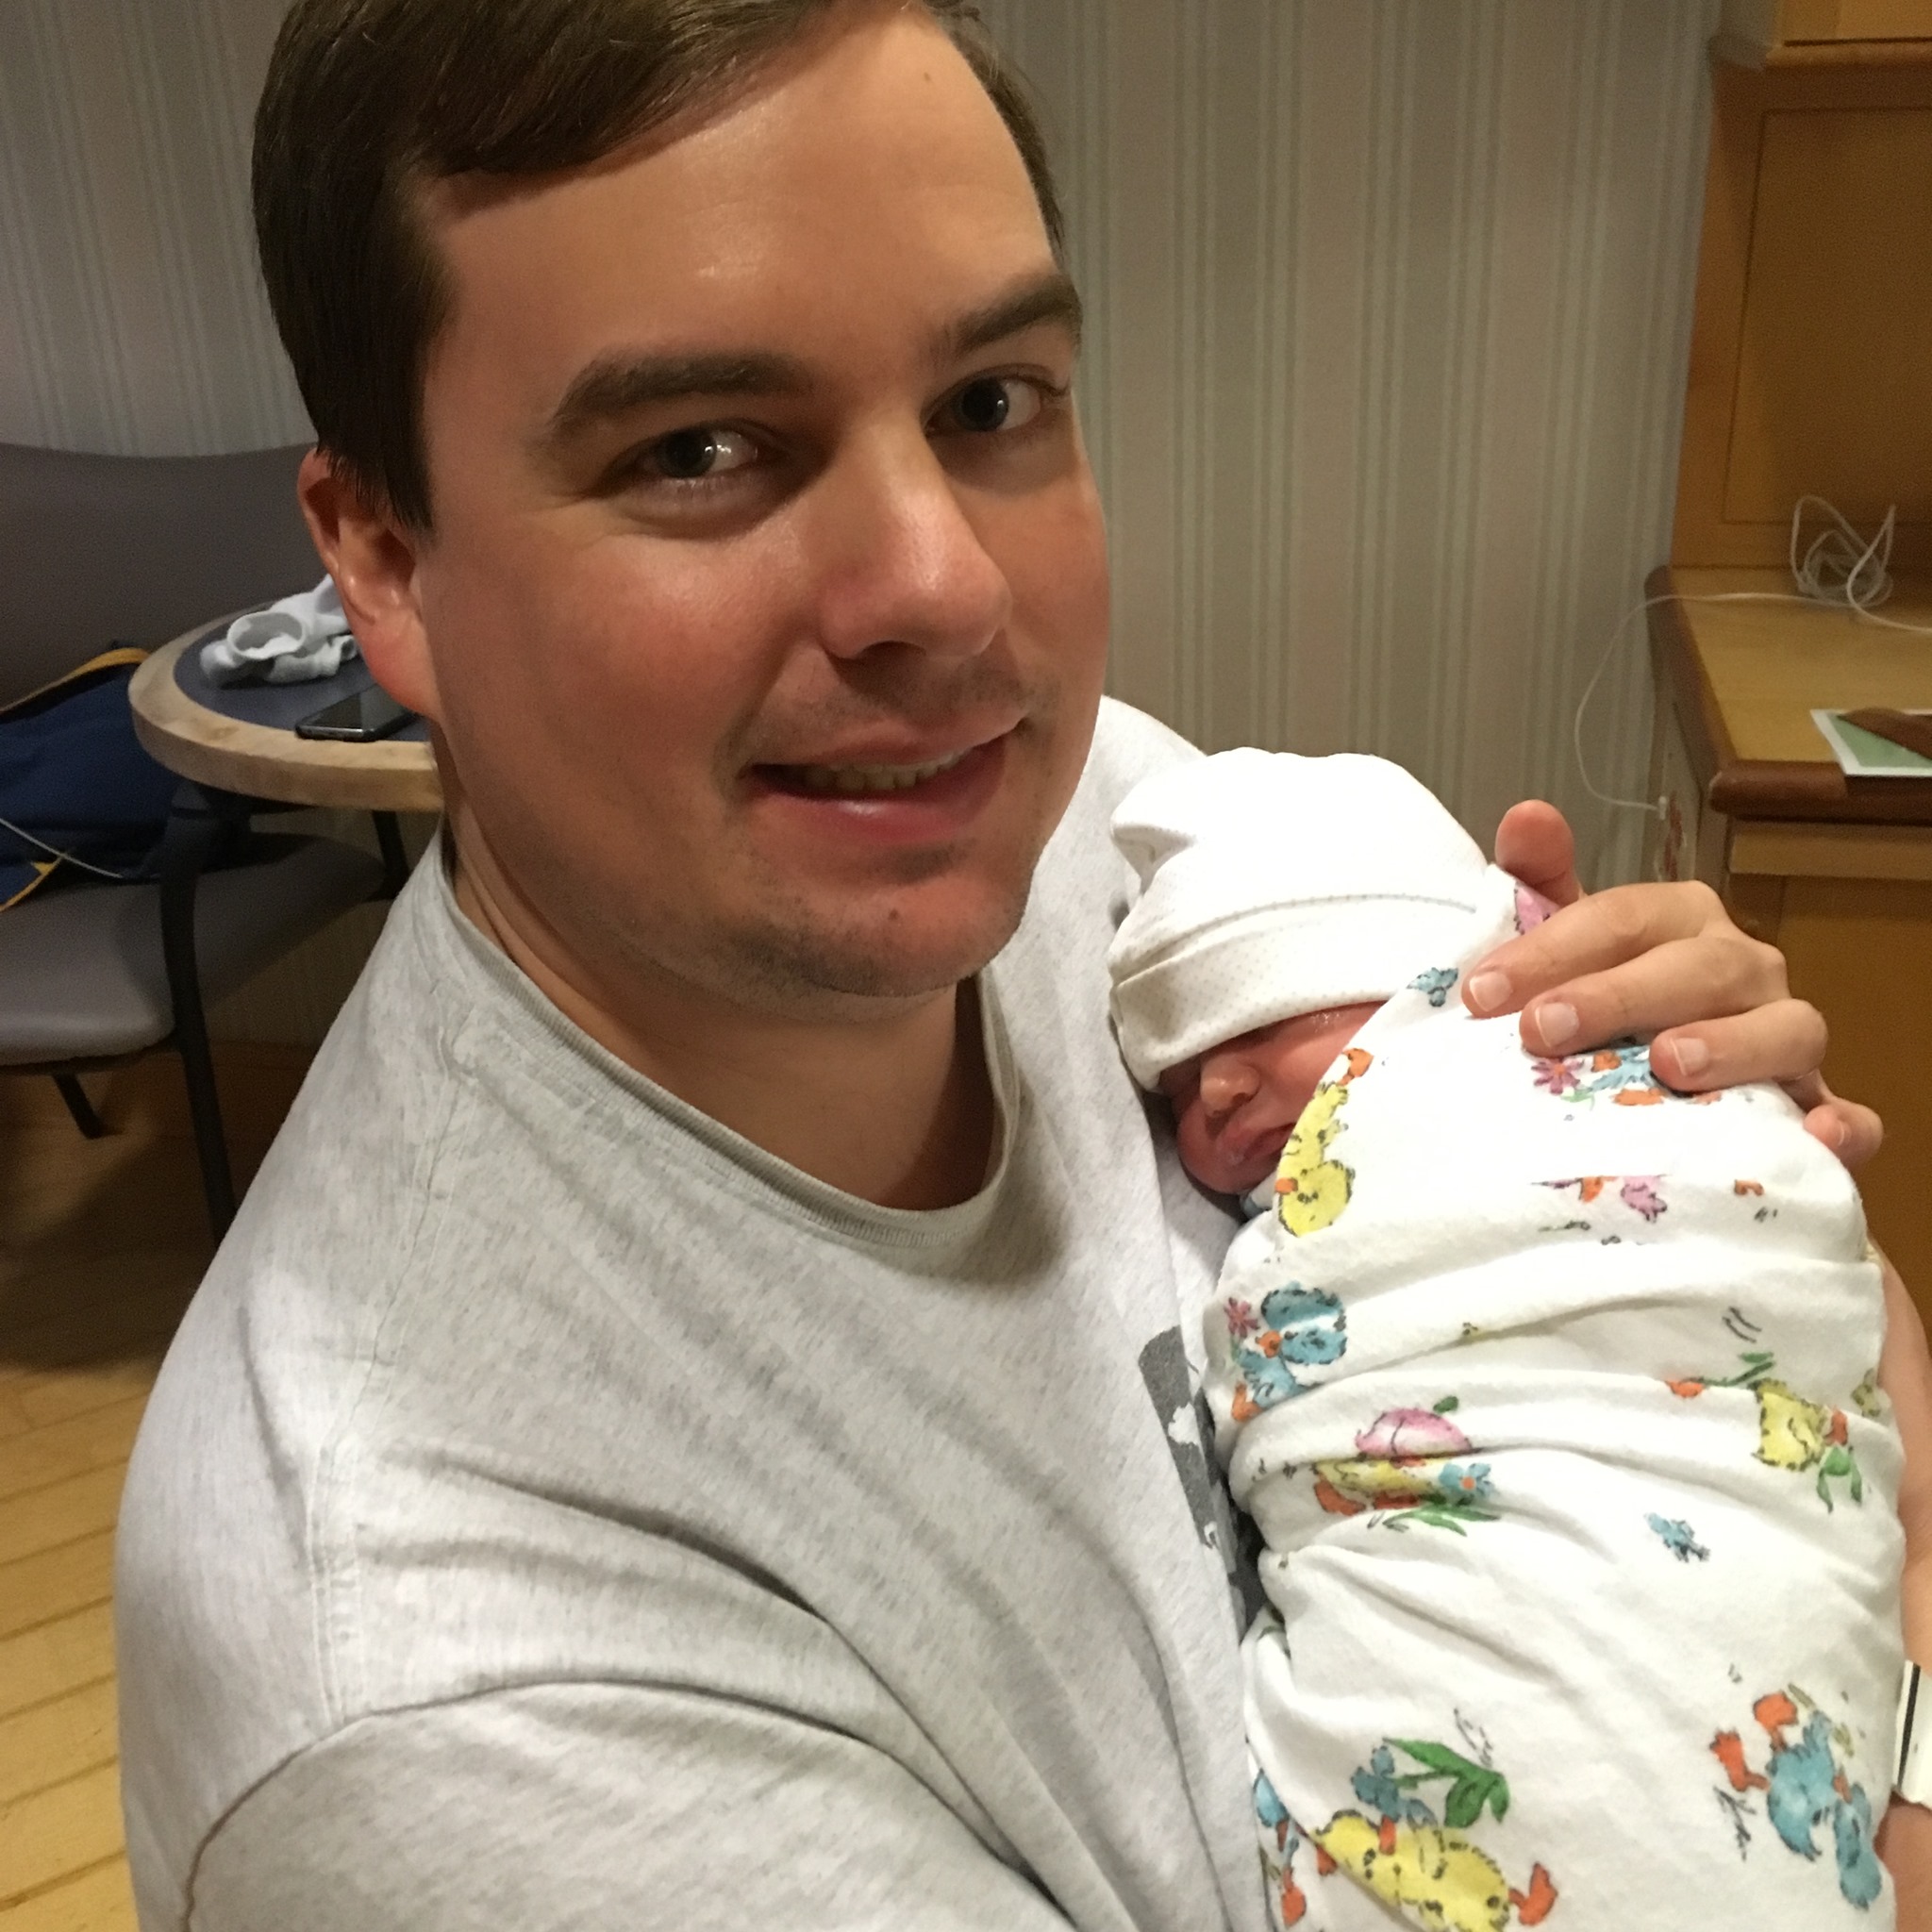 A first time father holding his newborn baby and smiling cautiously at the camera